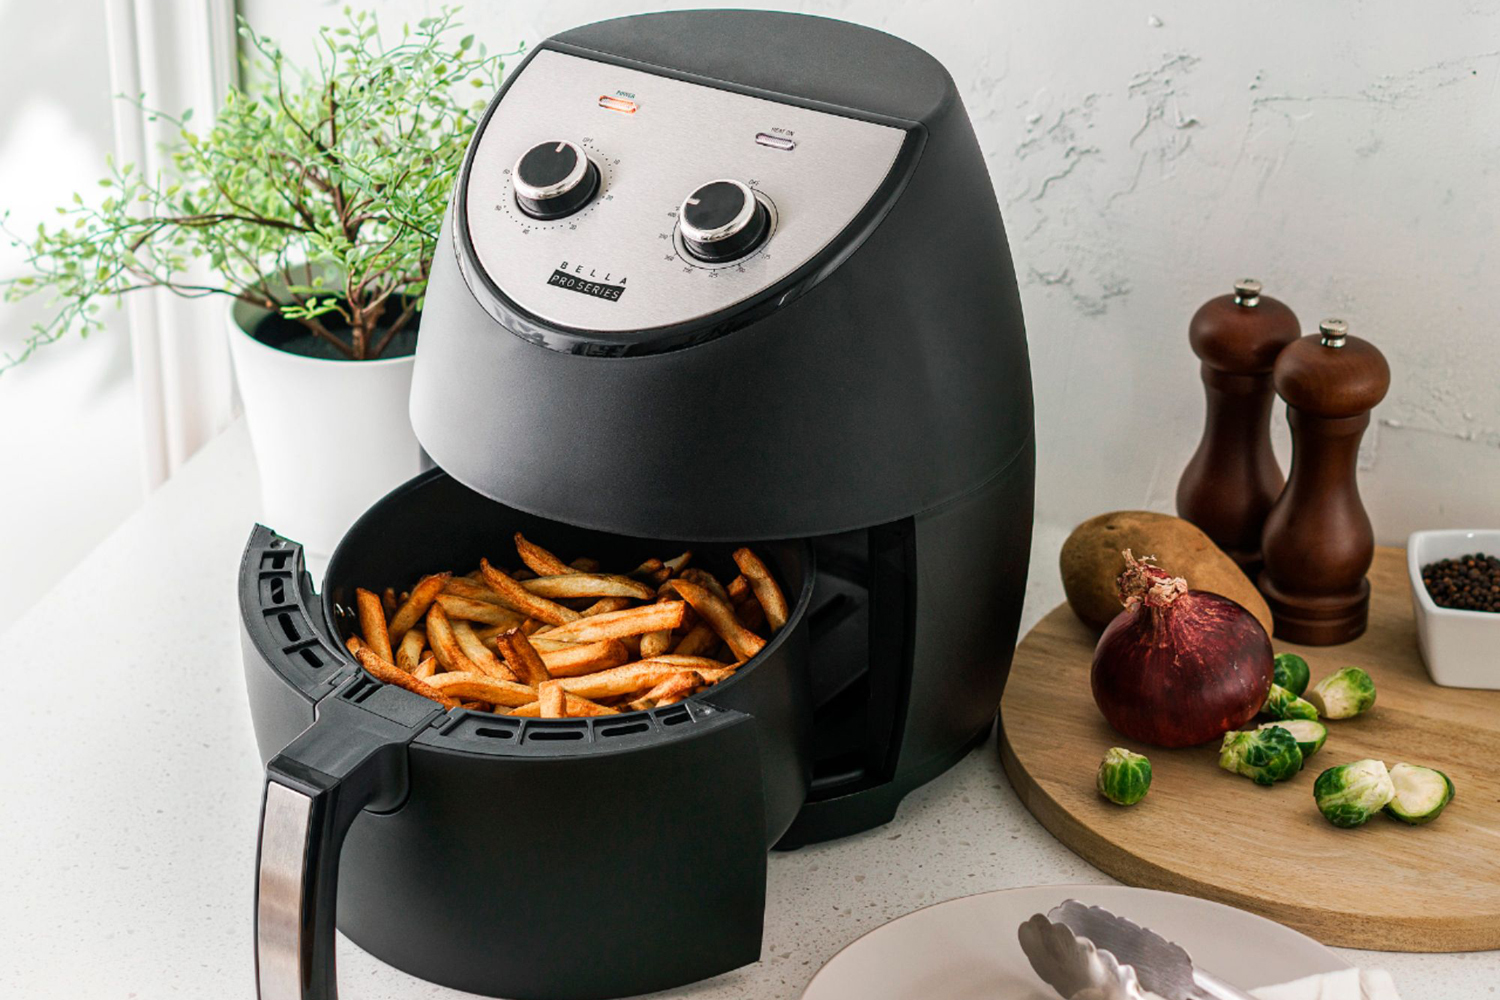  Best Black Friday air fryer deals still available today